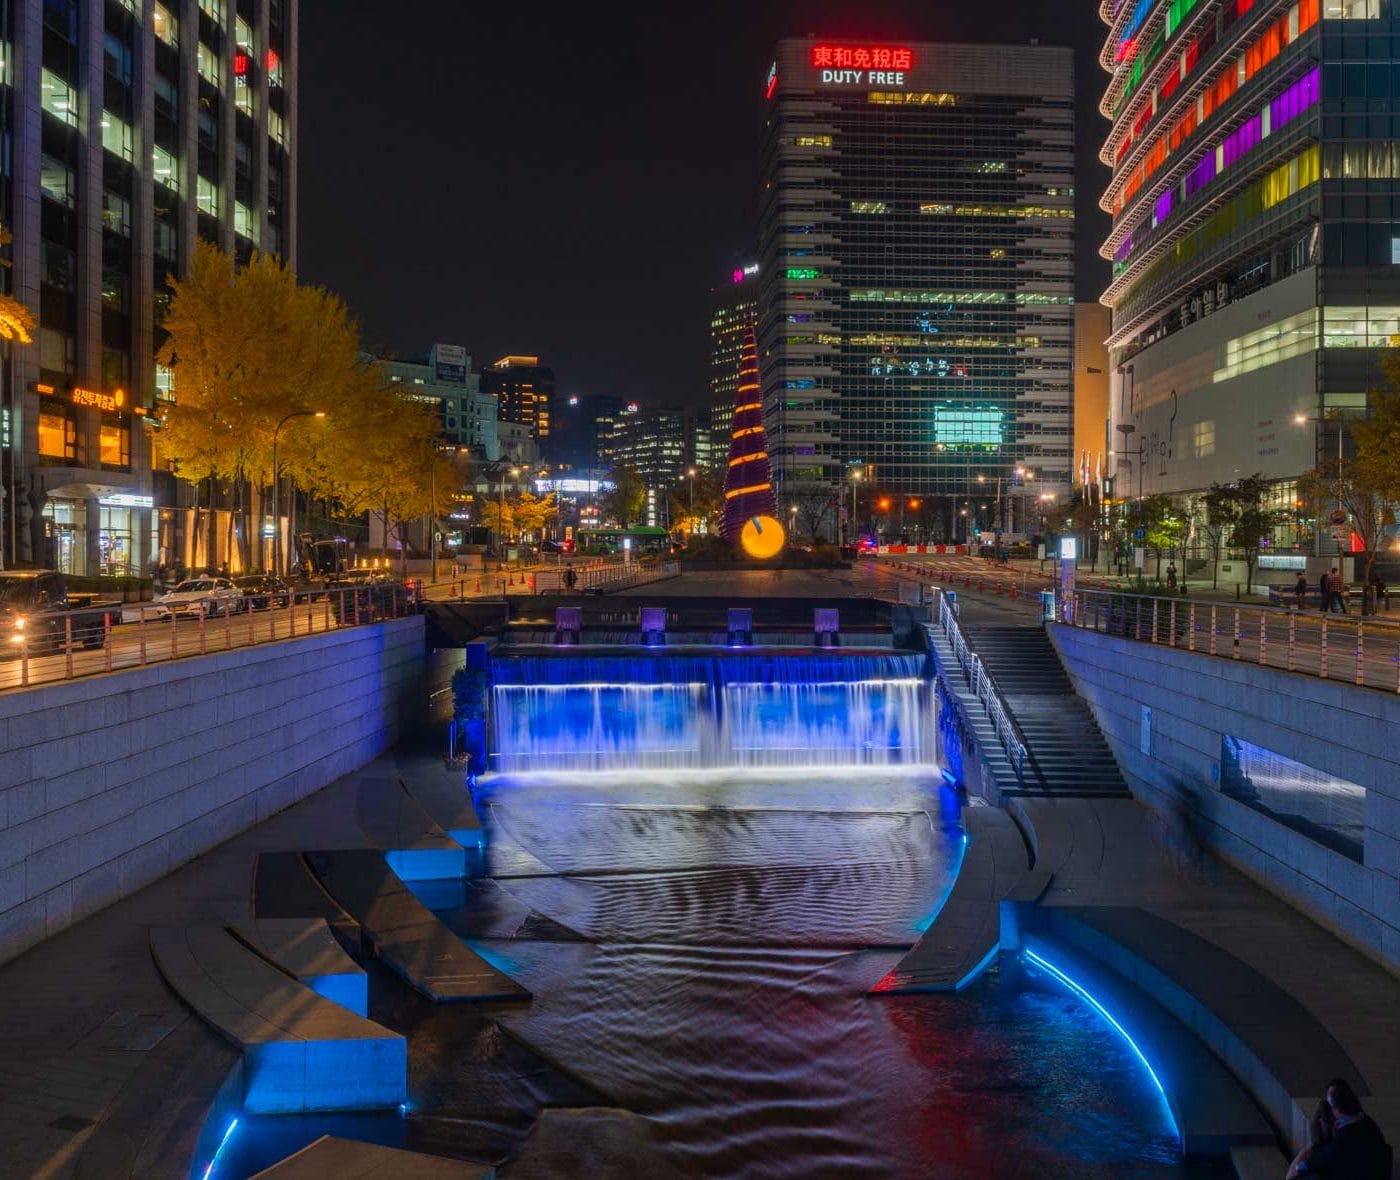 Seoul at Night - Best Views, Activities, Areas and More 5